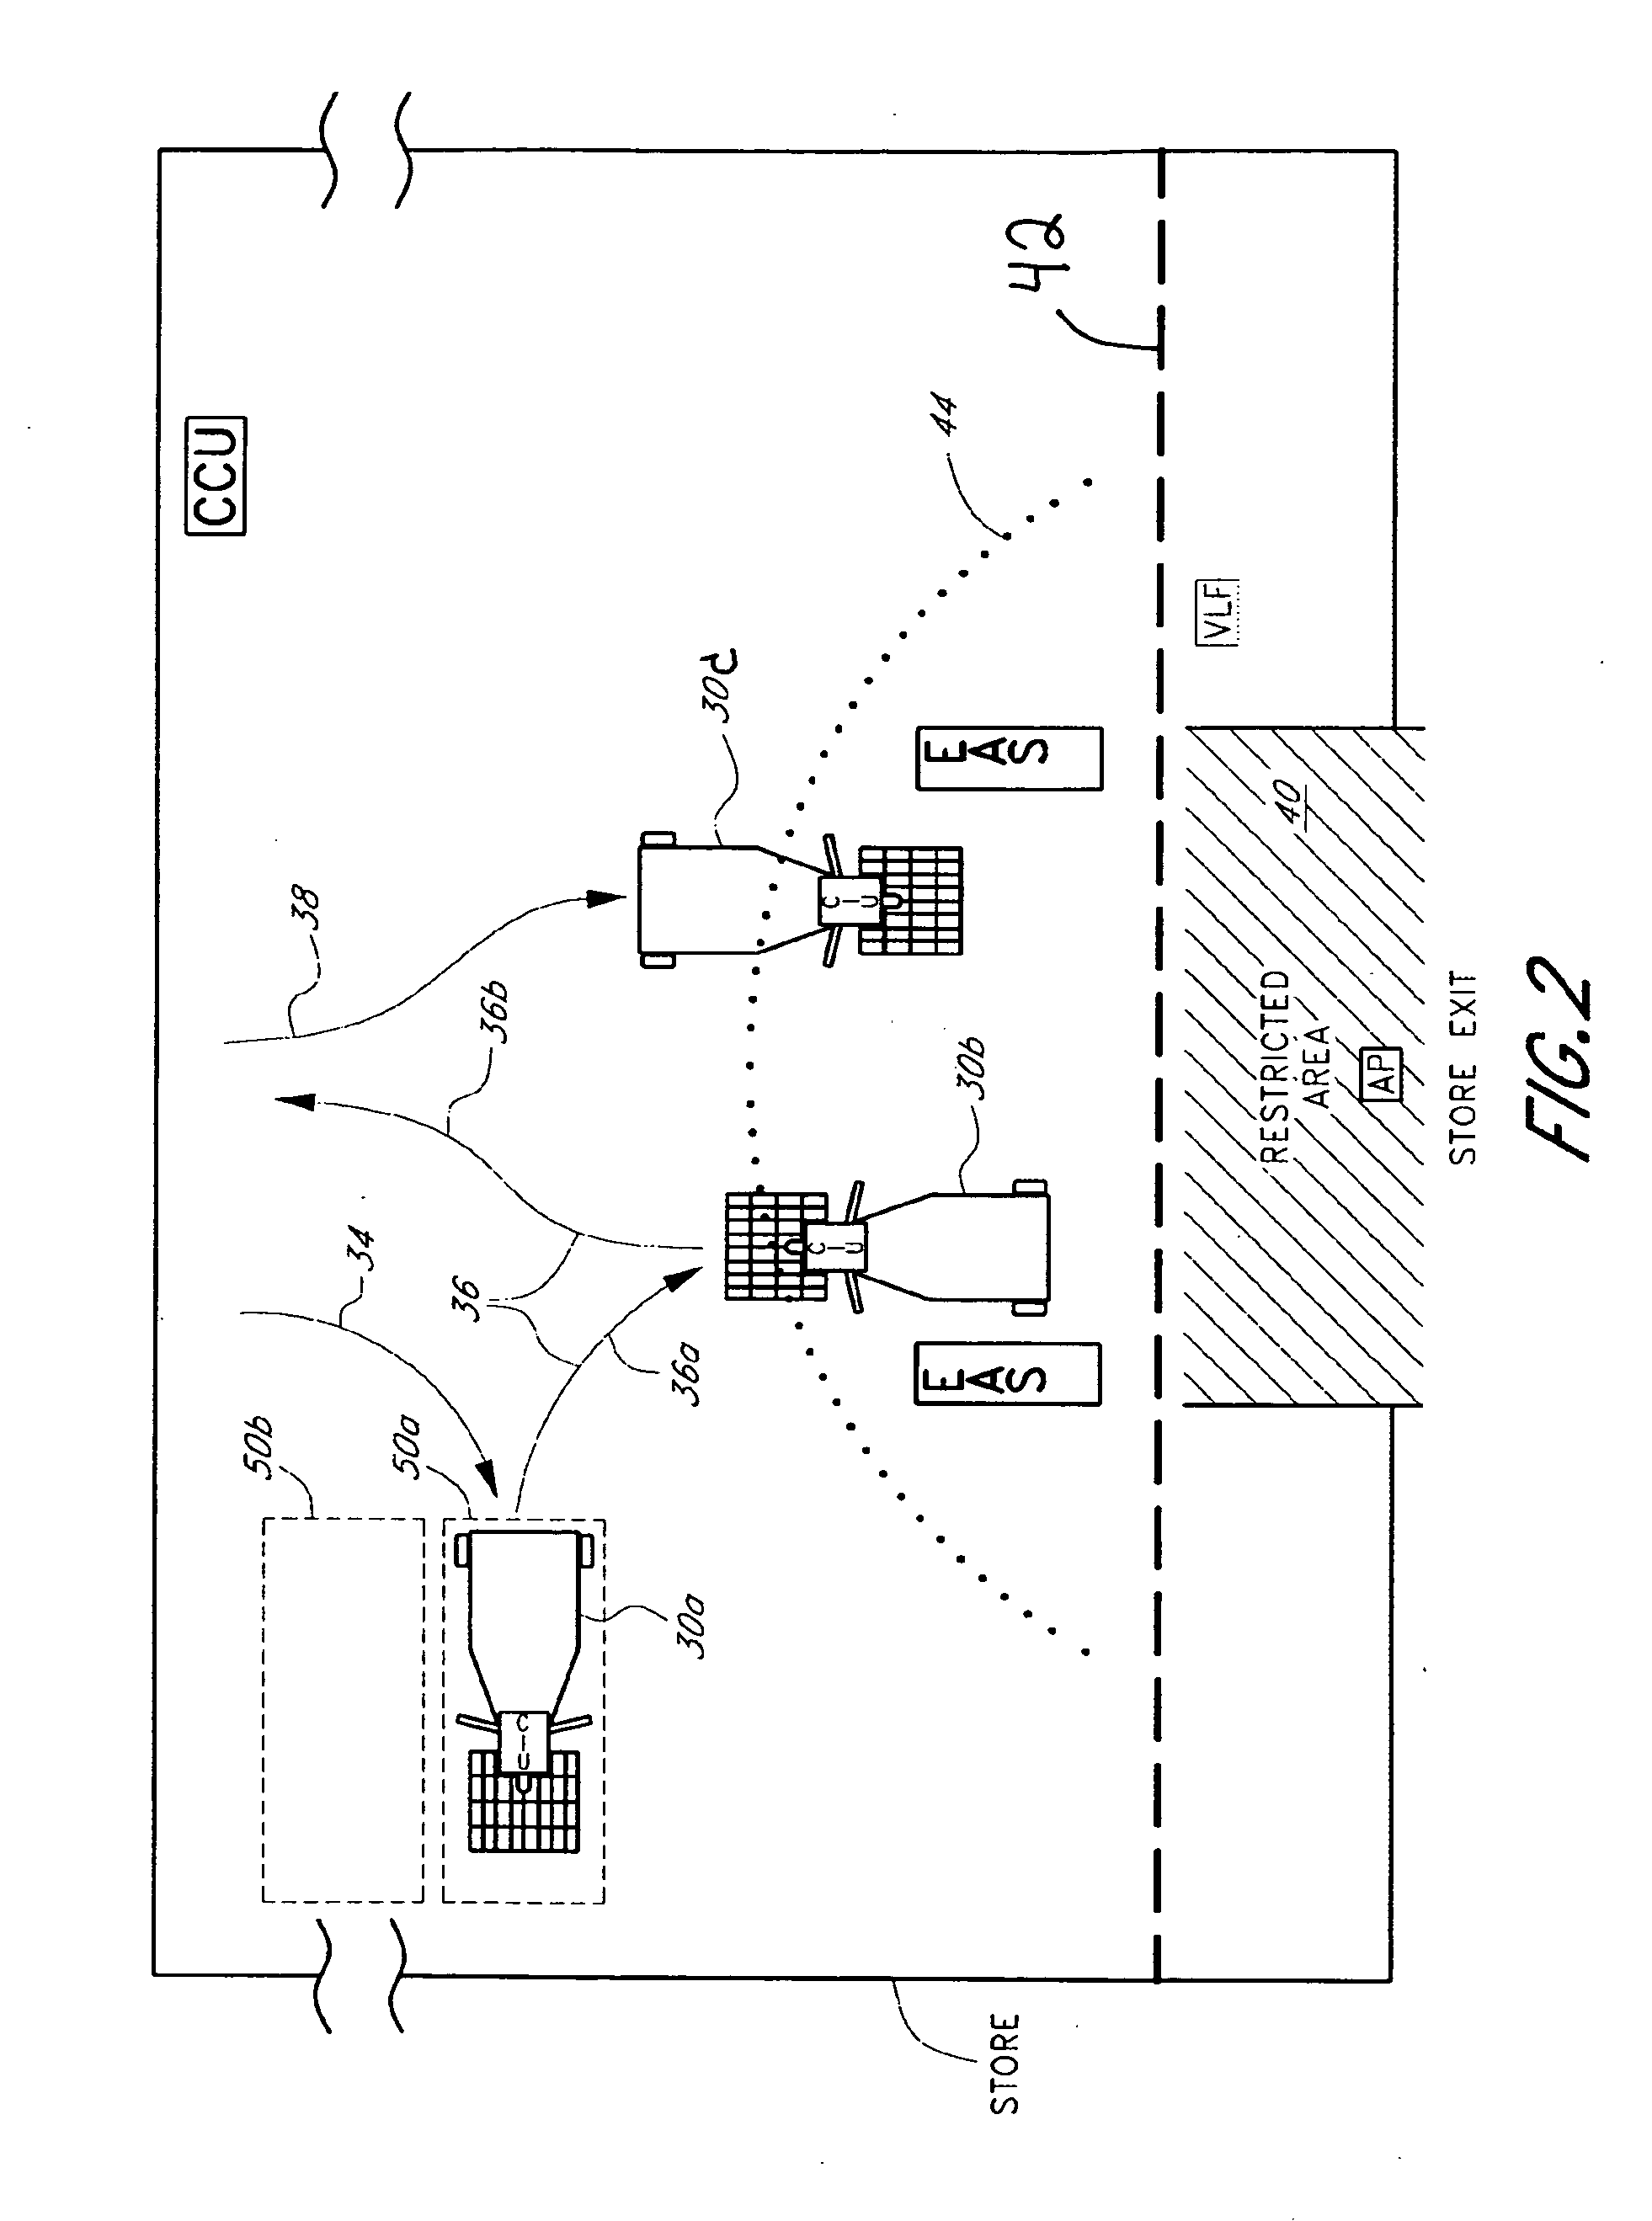 Systems and methods for locating and controlling powered vehicles